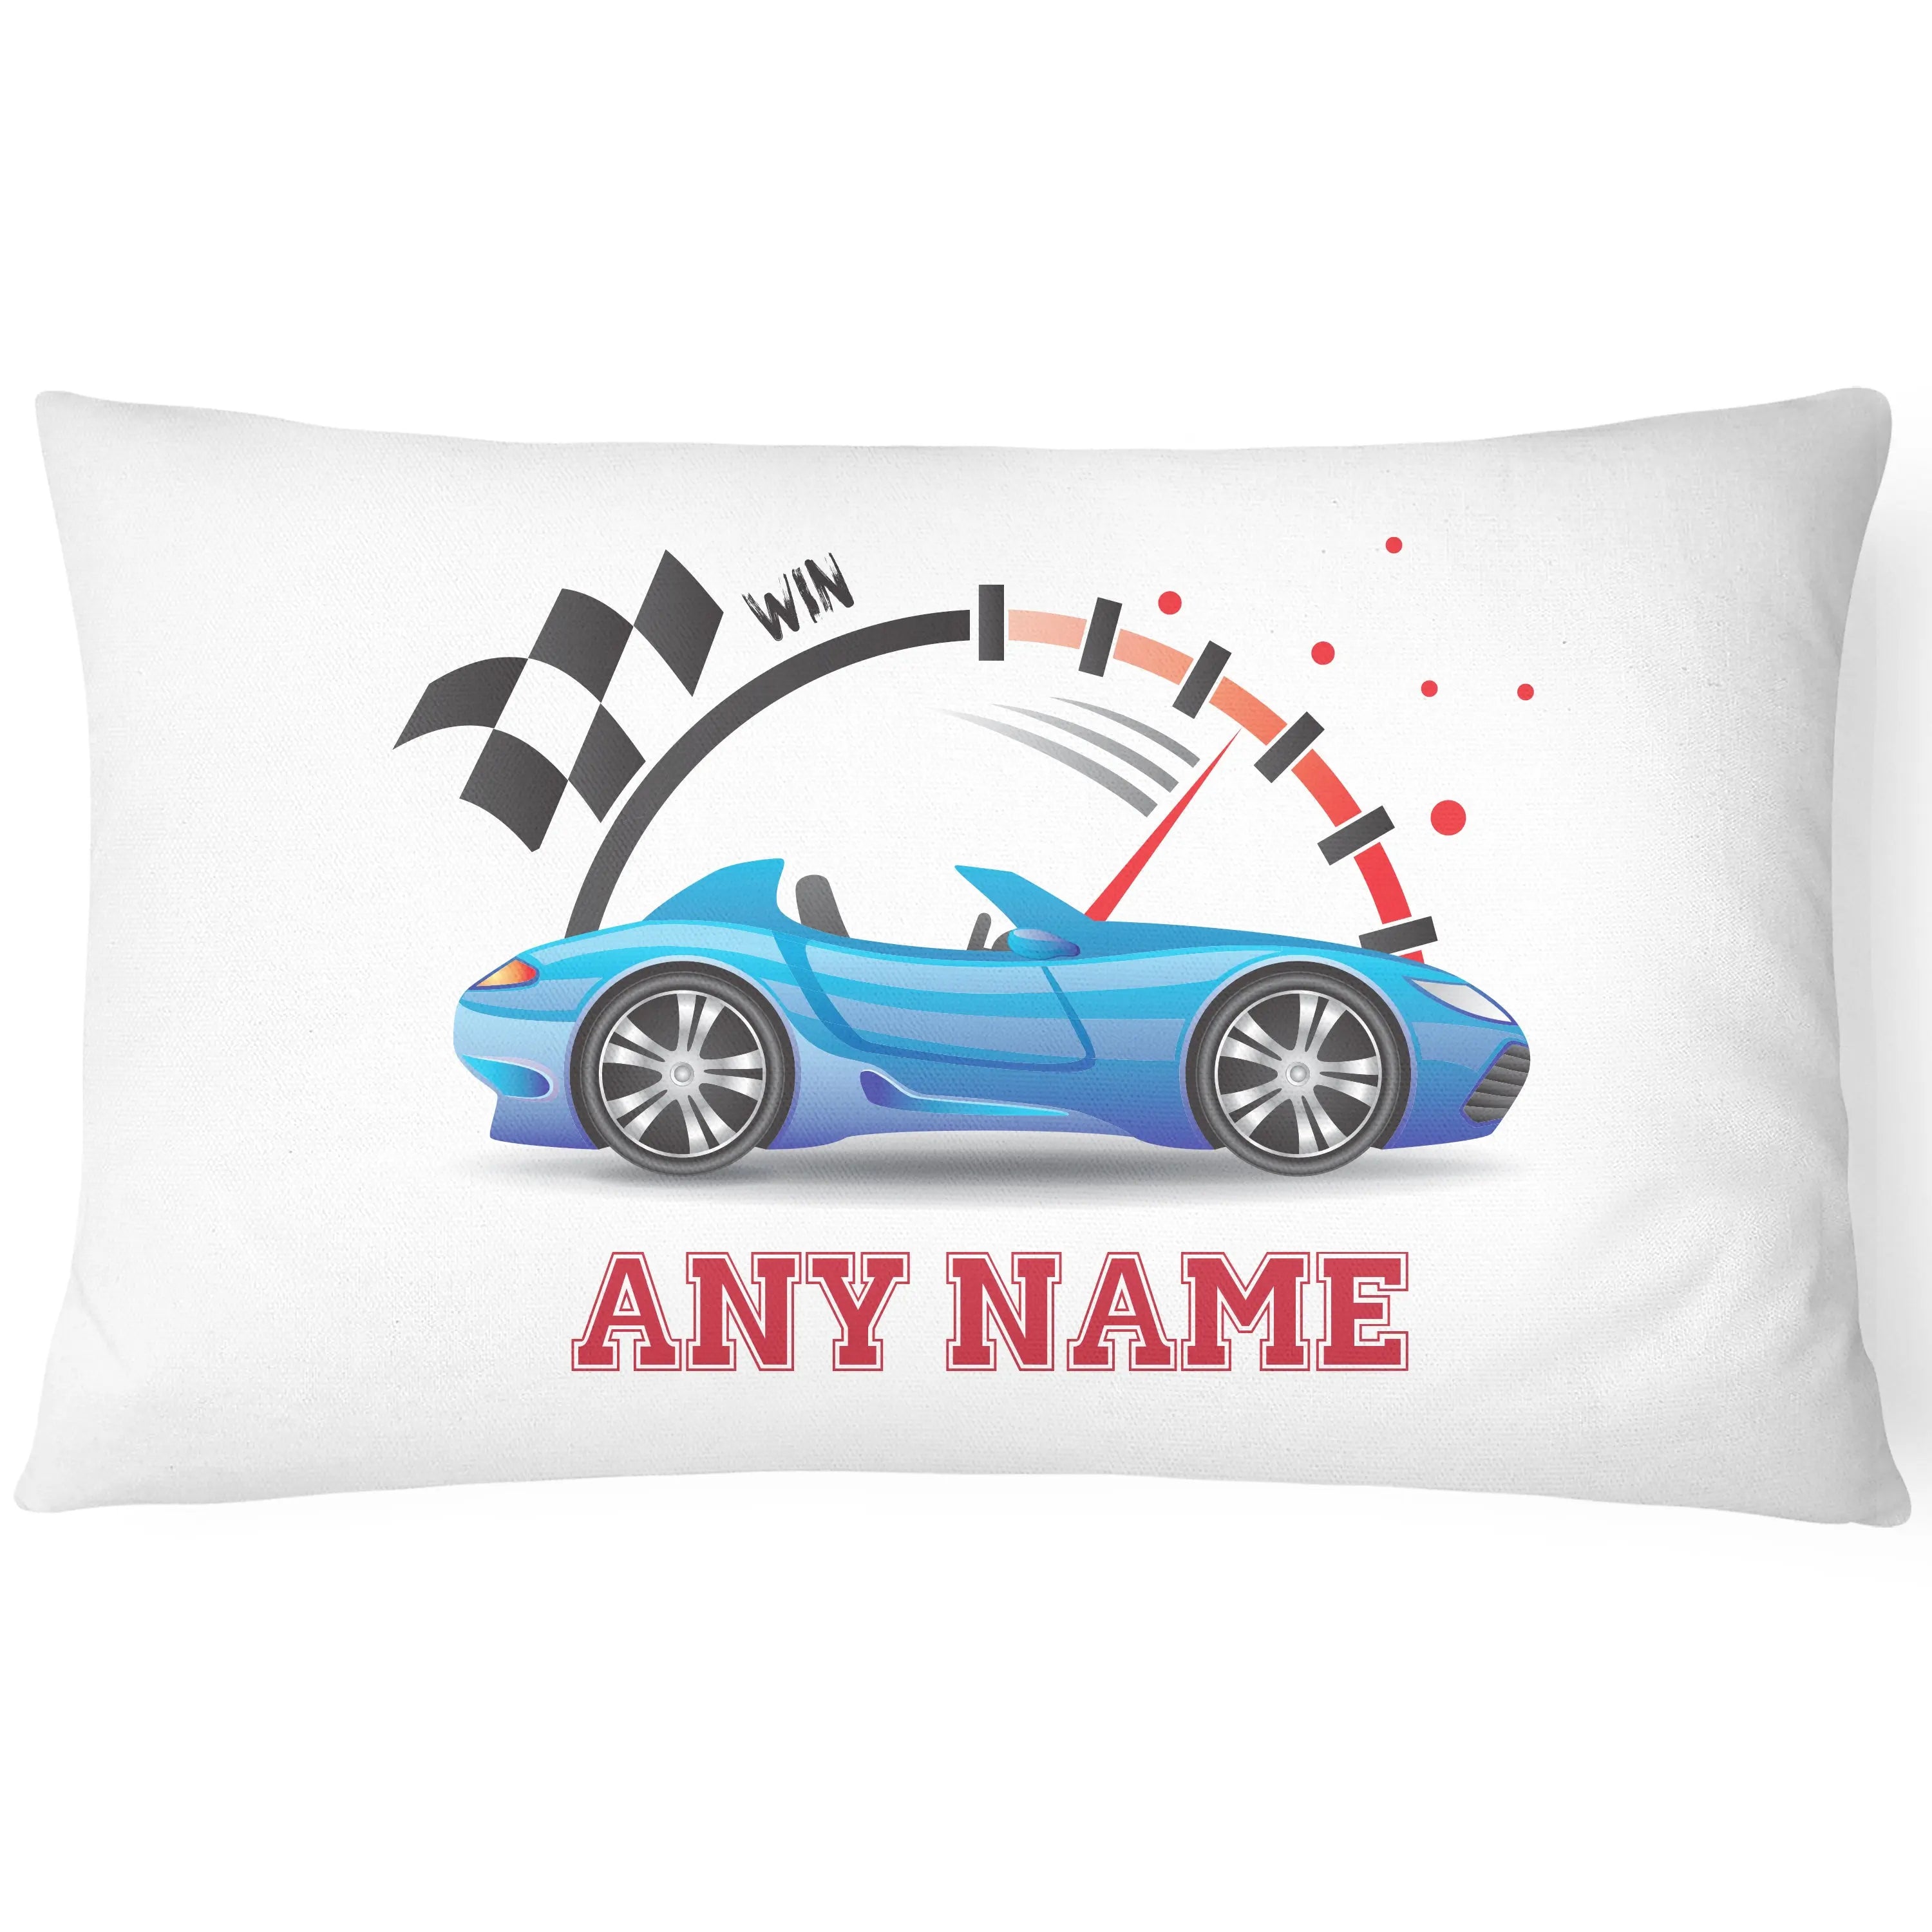 Race Car Pillowcase for Kids - Personalise With Any Name - Perfect Children's Gift - Dark Blue - CushionPop